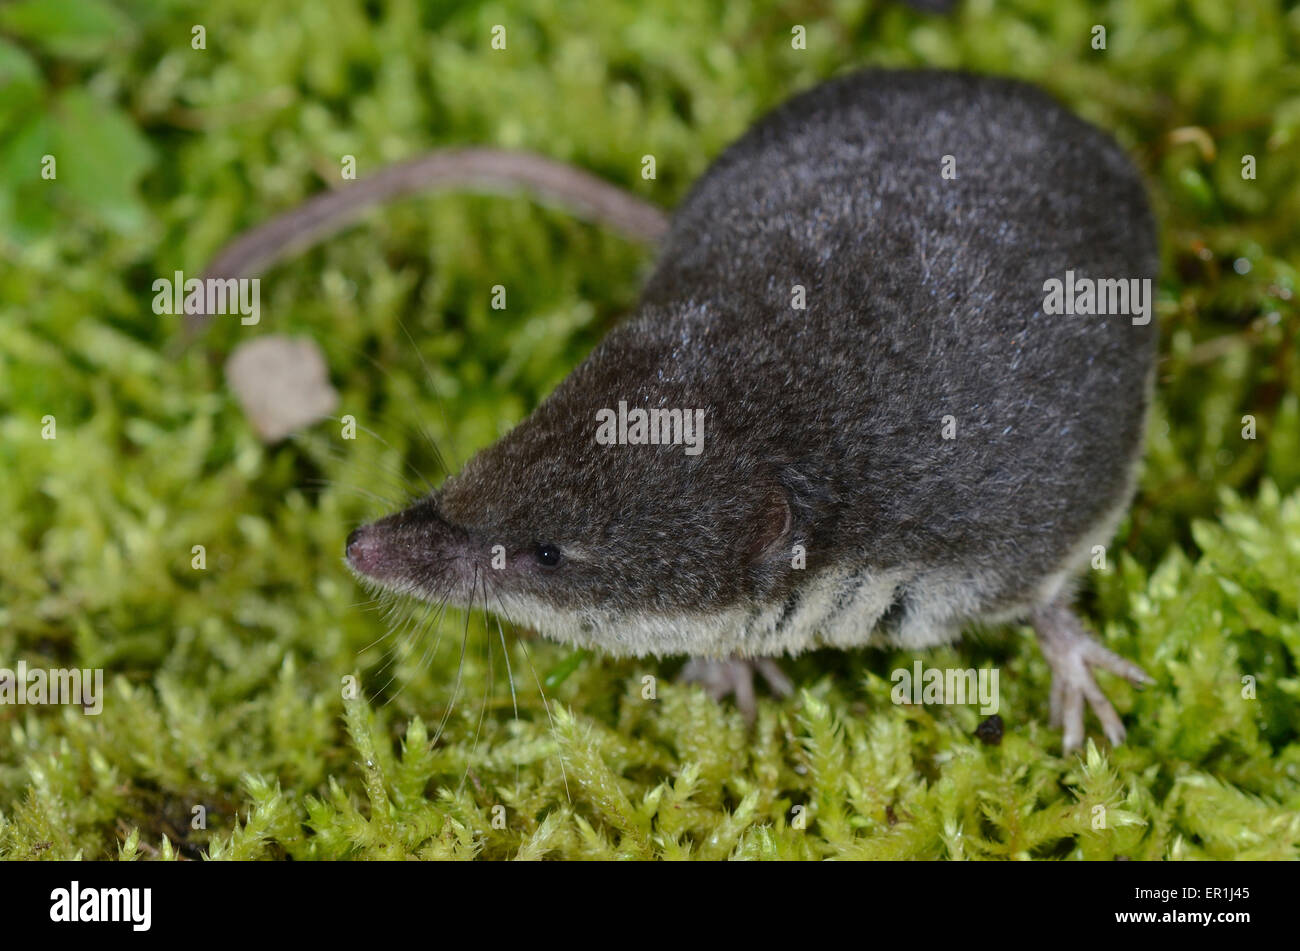 A water shrew on moss UK Stock Photo